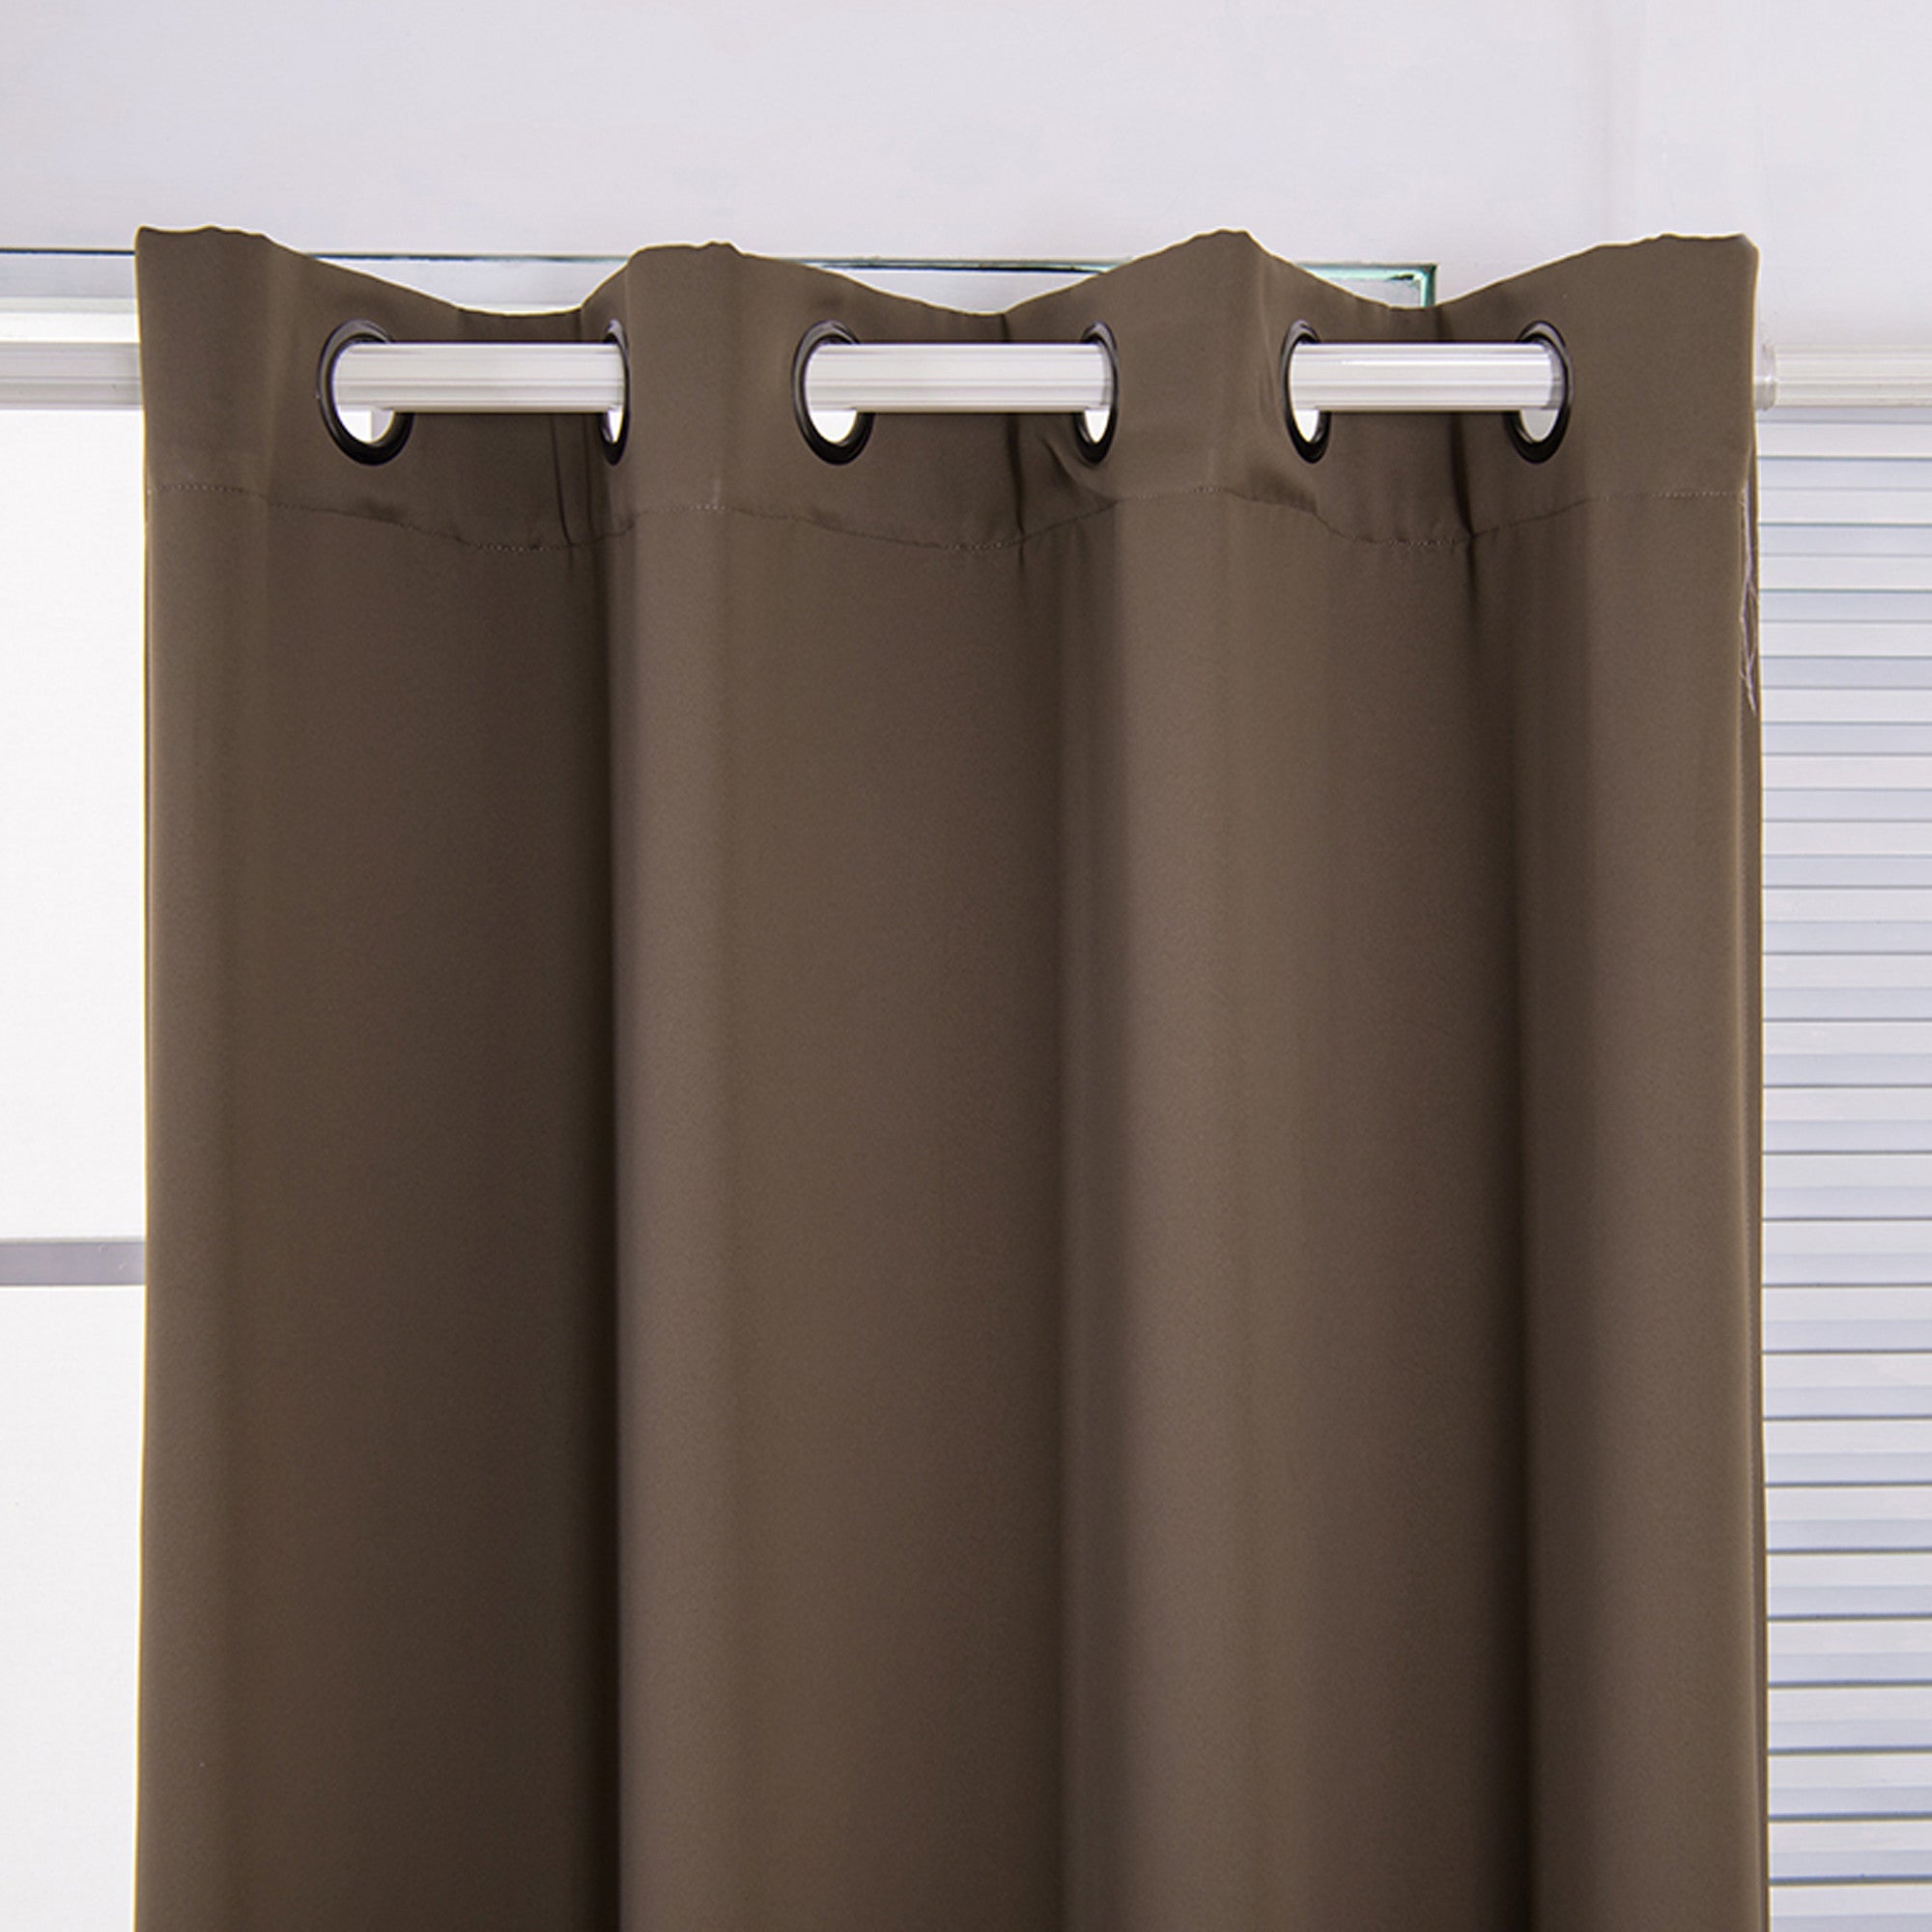 Teamson Home 63" Edessa Premium Solid Insulated Thermal Blackout Window Curtain Panels with Grommets, Hazelnut Brown